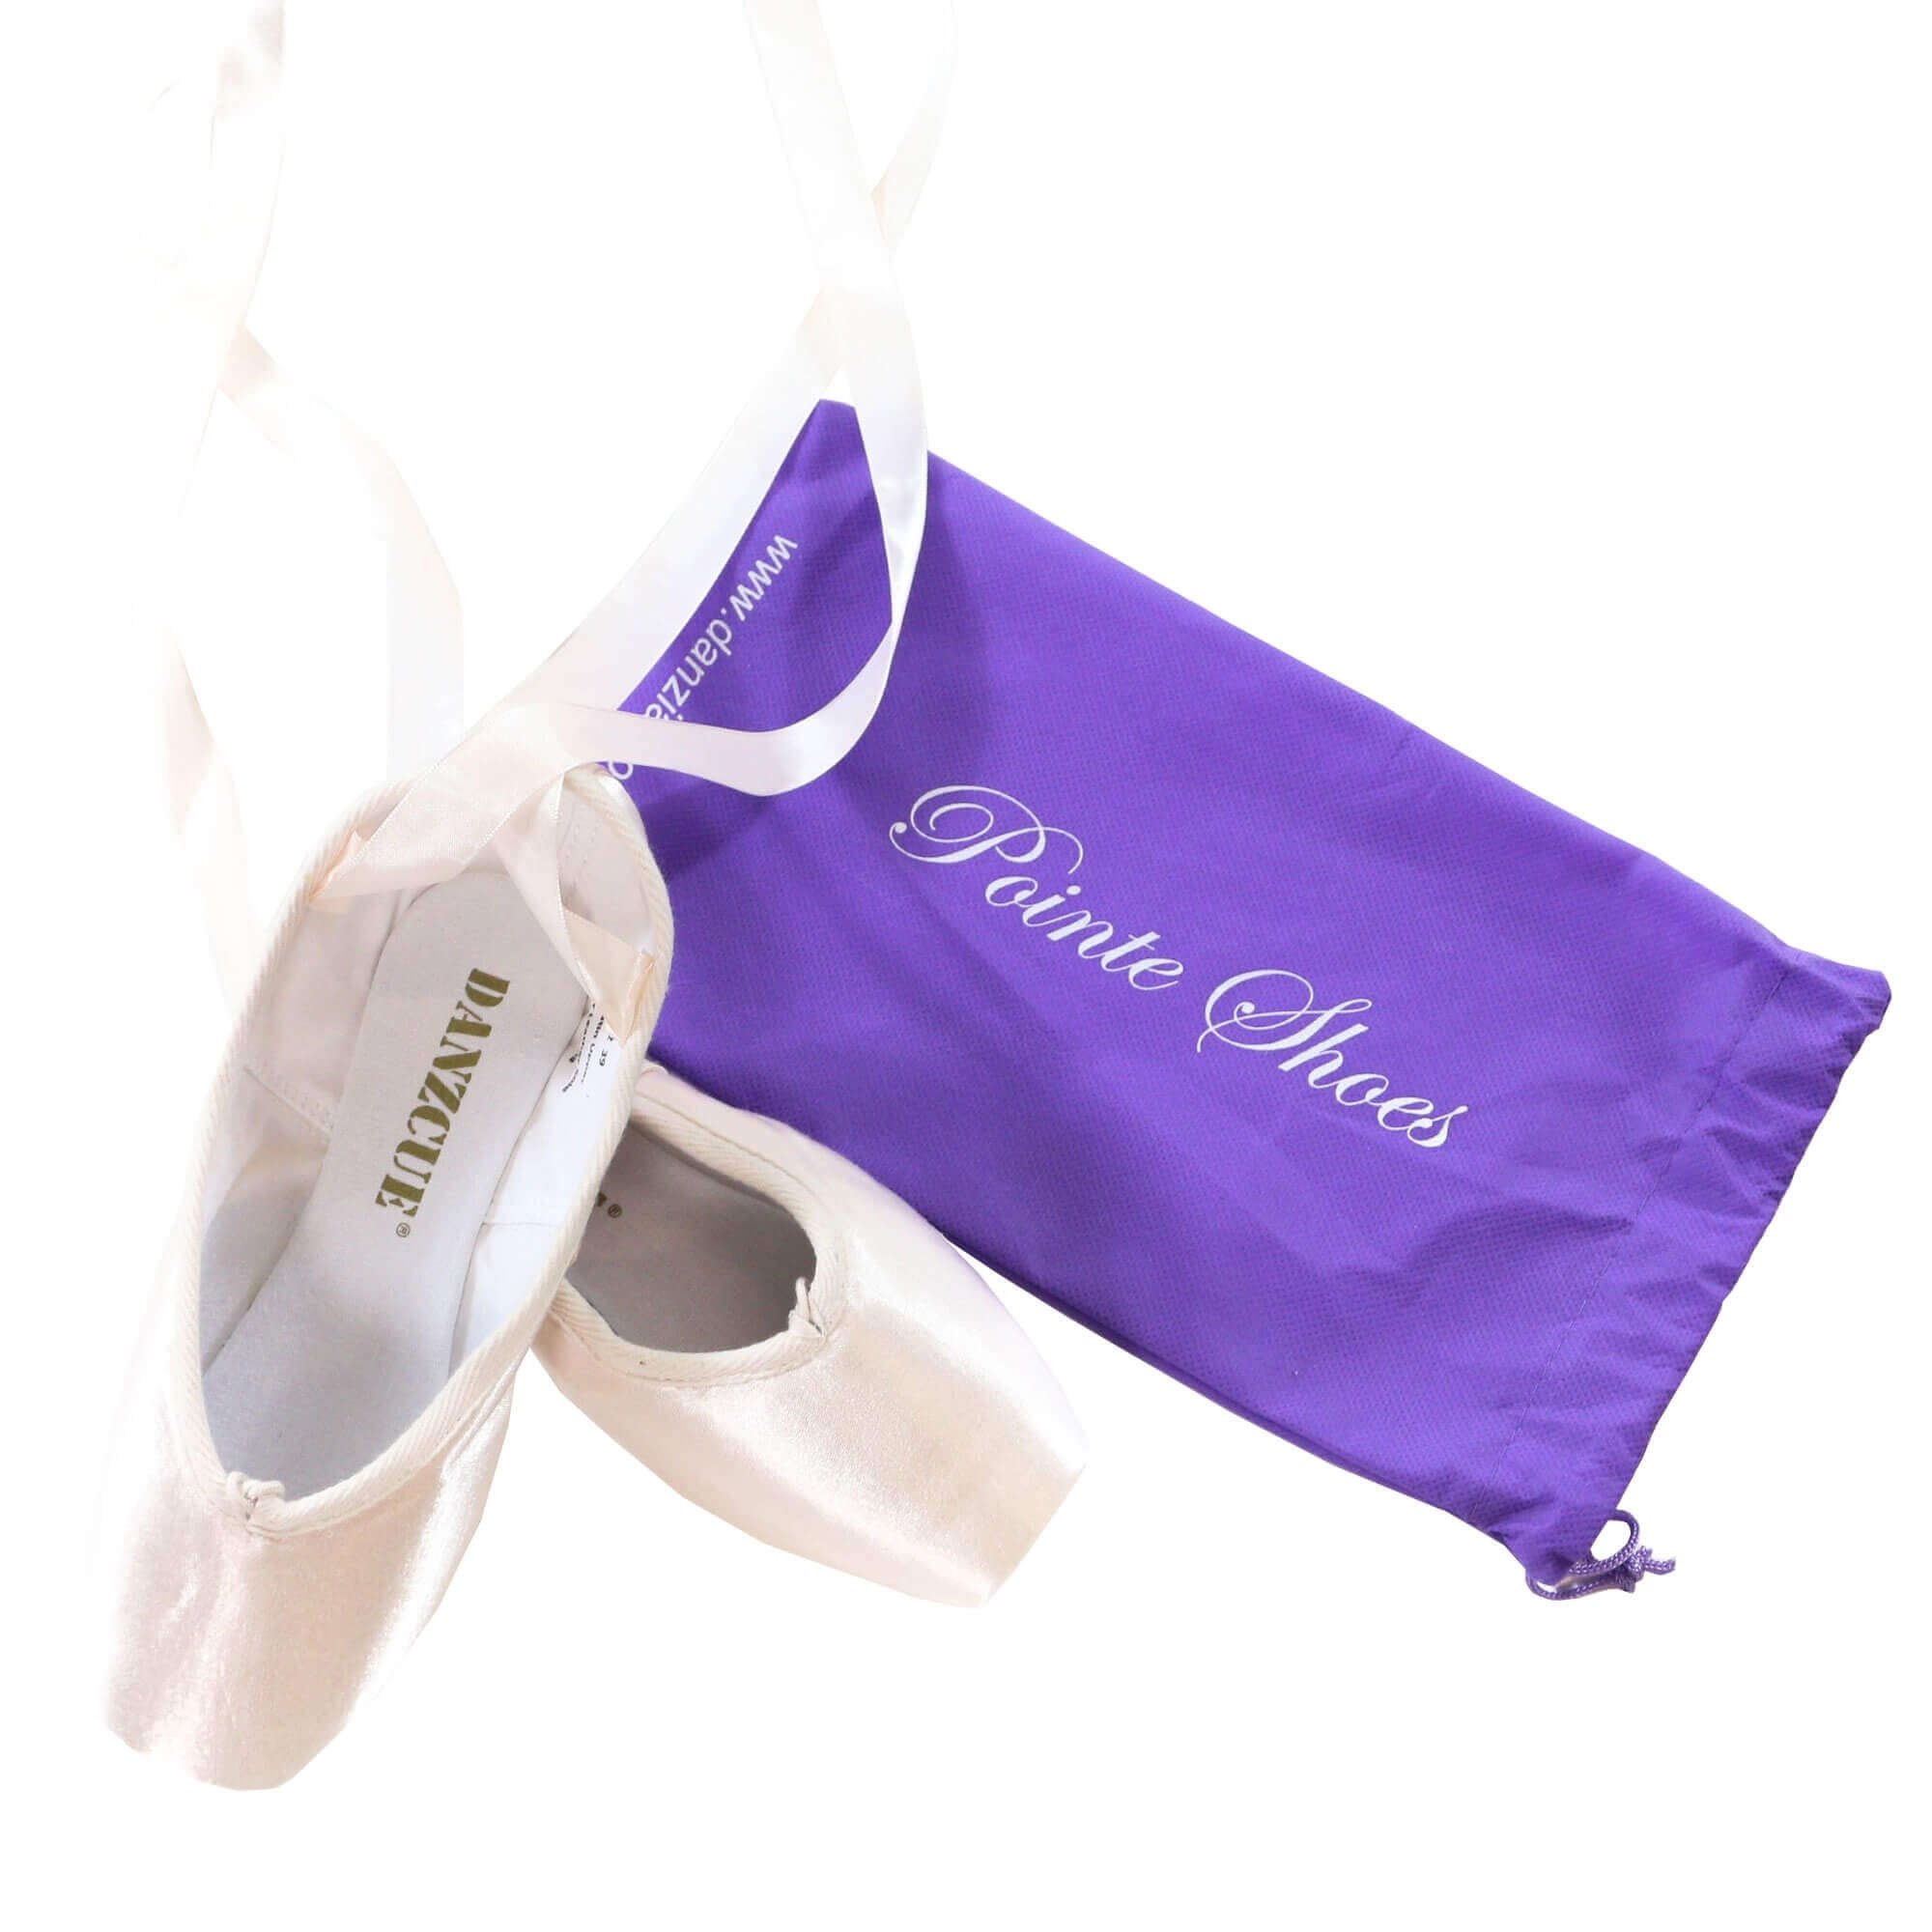 Danzcue Womens Flexible Soft Shank Pointe Shoes With Ribbon - Click Image to Close